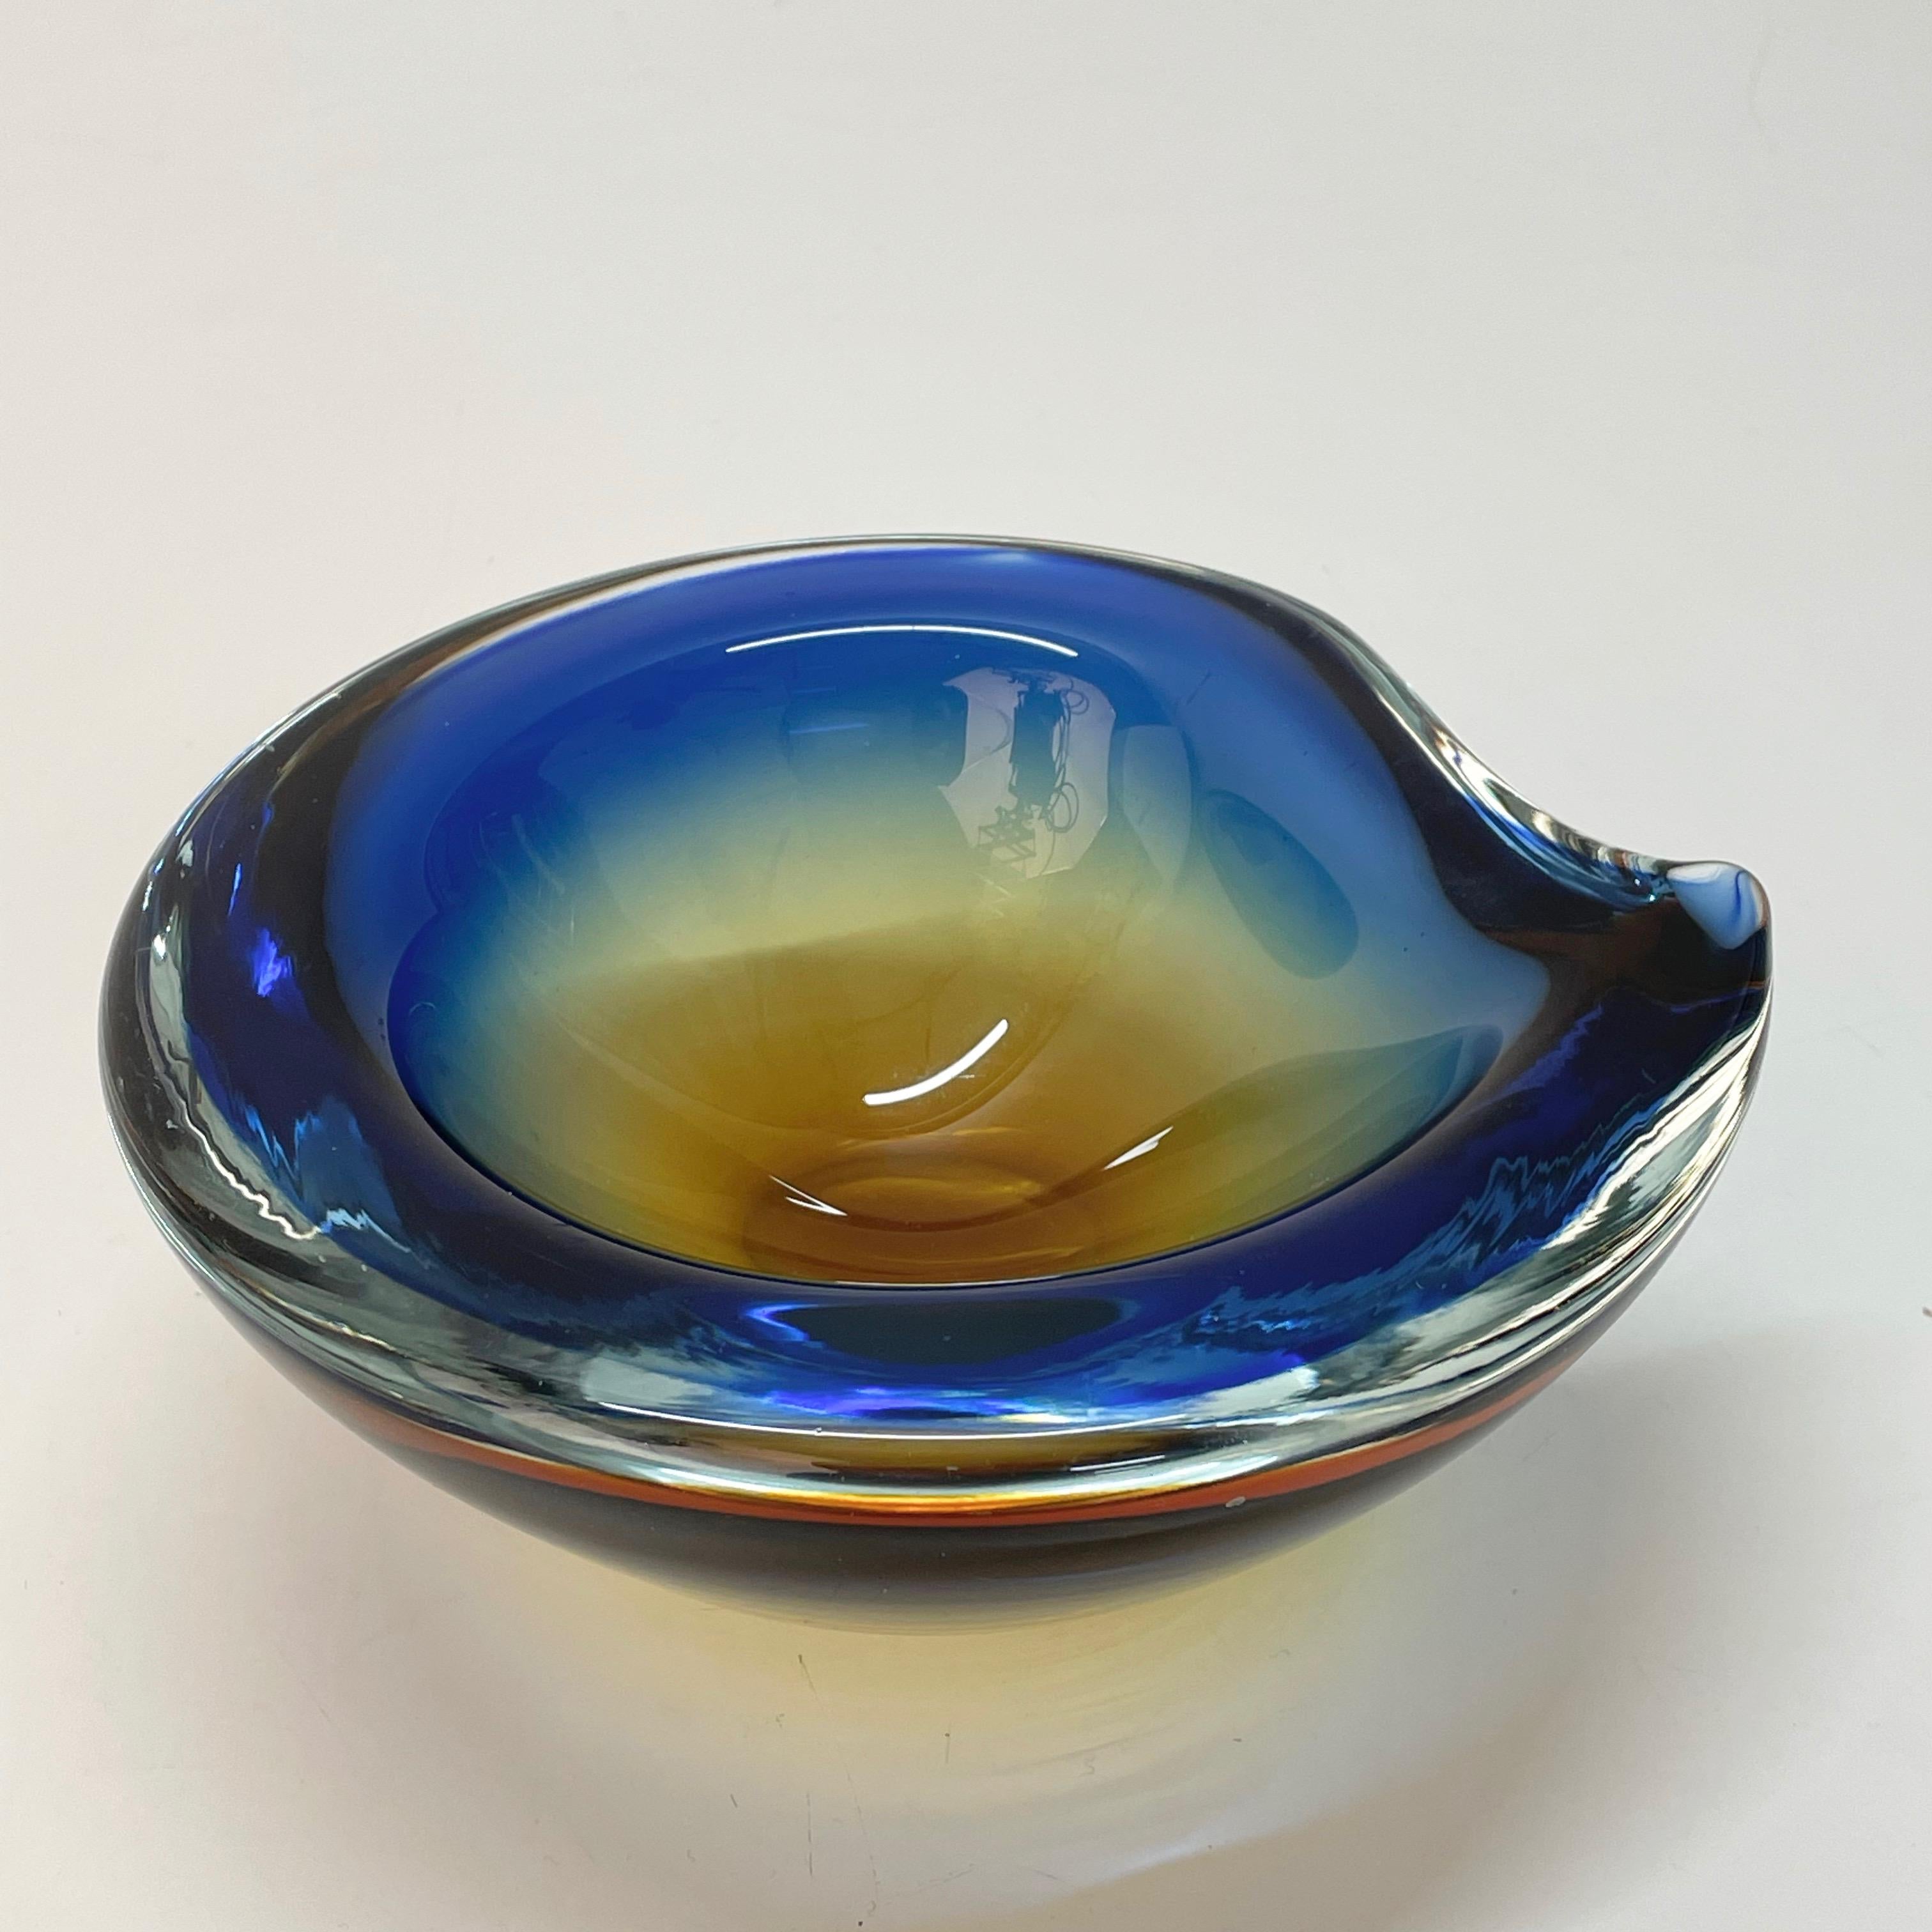 Murano Ashtray or Bowl, Flavio Poli Submerged Glass Amber Blue, Italy, 1960 For Sale 10